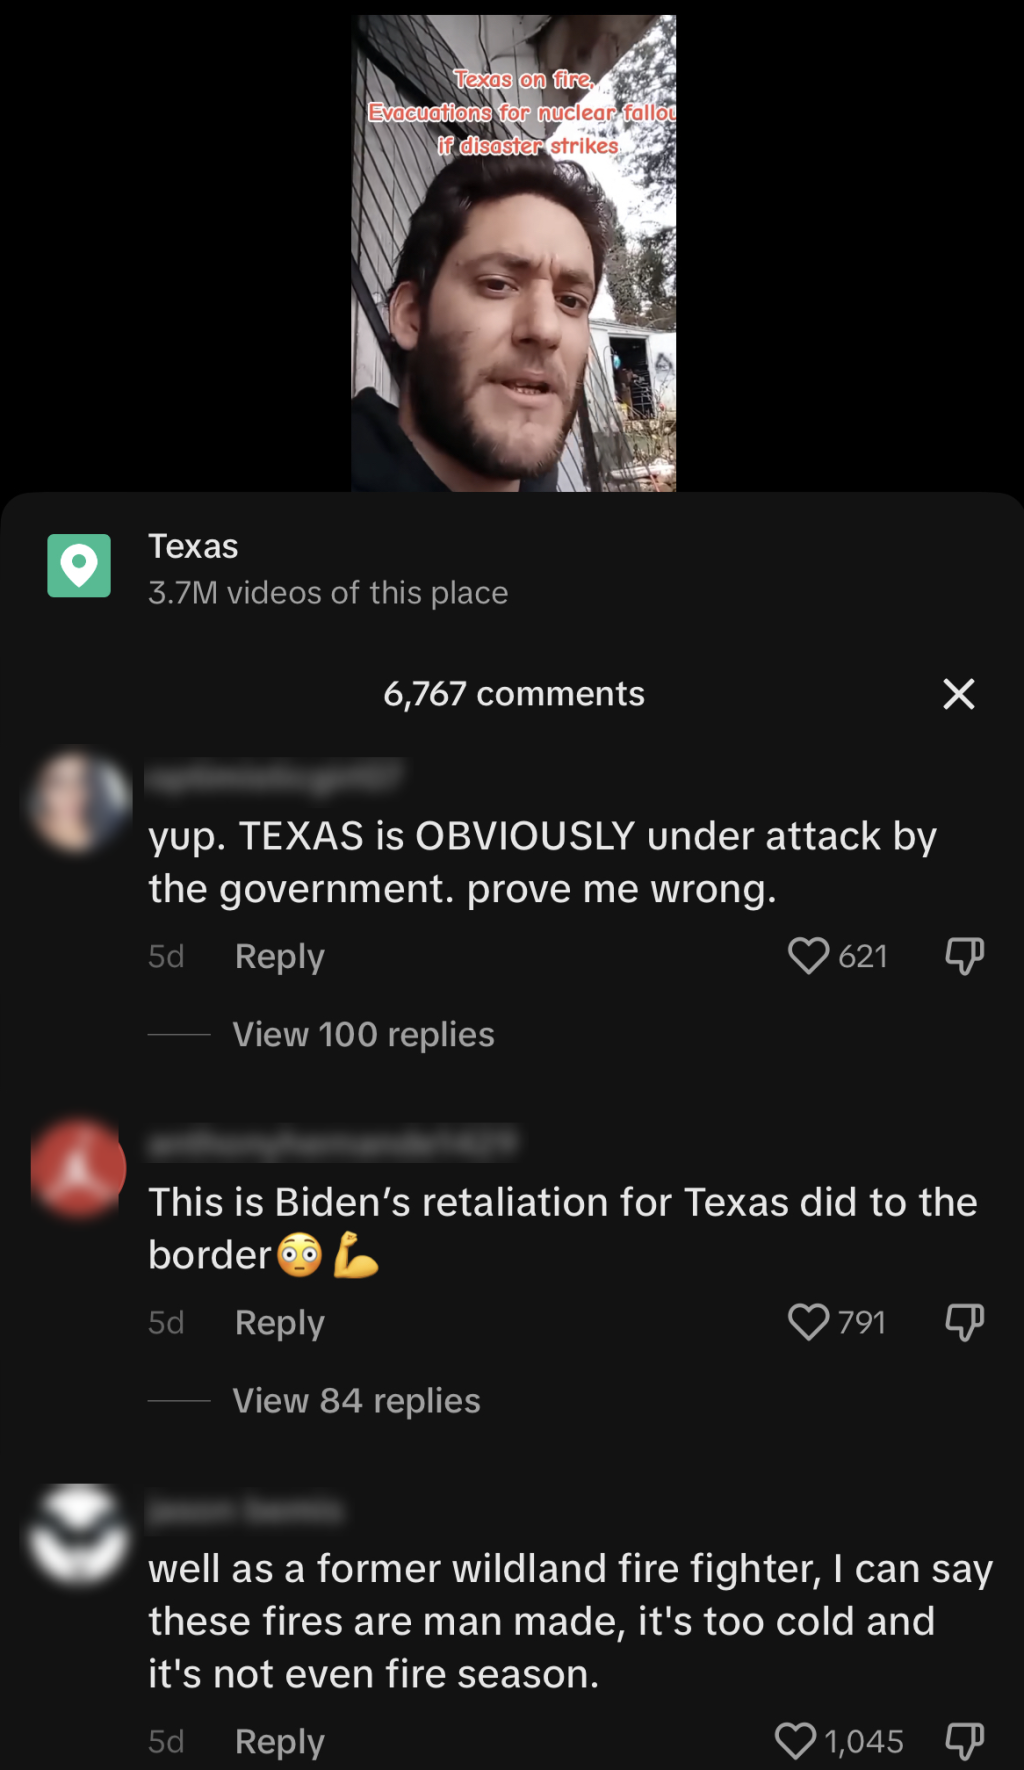 commenters saying "this is Biden's retaliation against Texas"